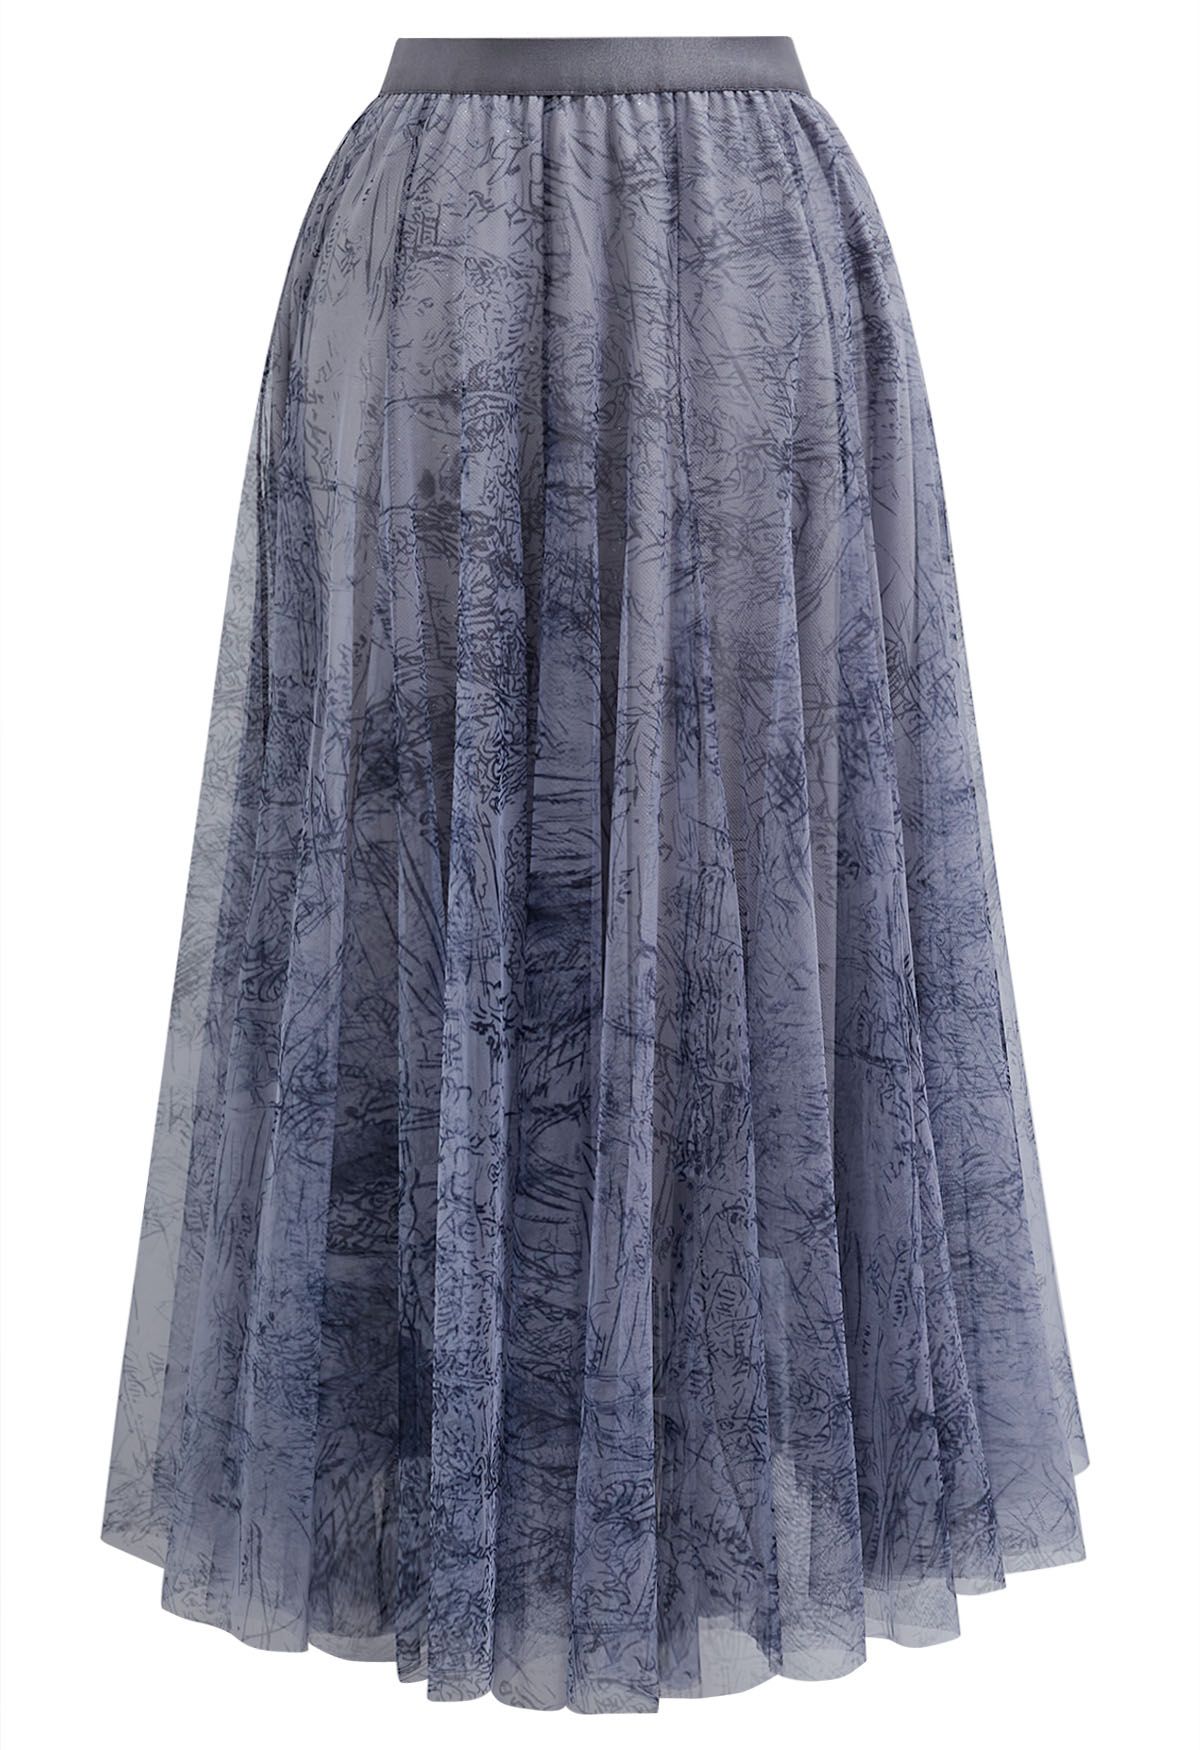 Glitter Fairyland Mesh Tulle Skirt in Dusty Blue - Retro, Indie and ...